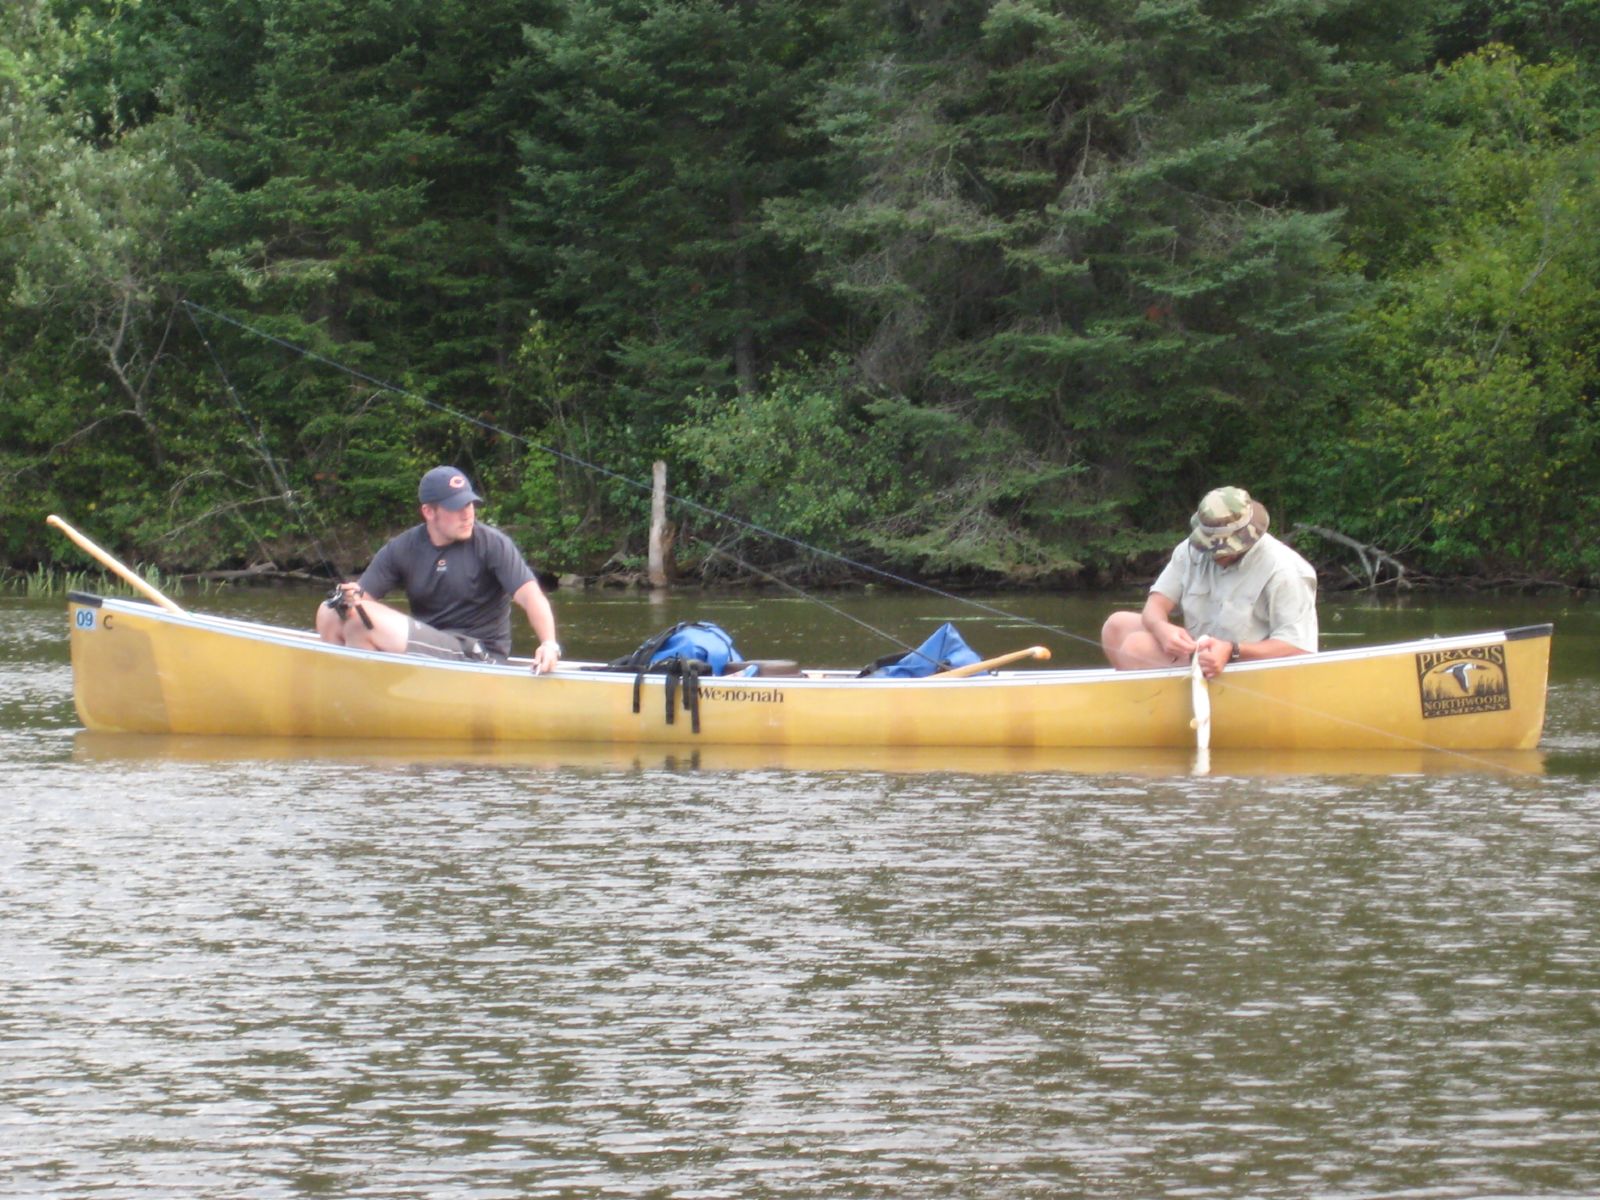 two people sitting in a yellow canoe on the river